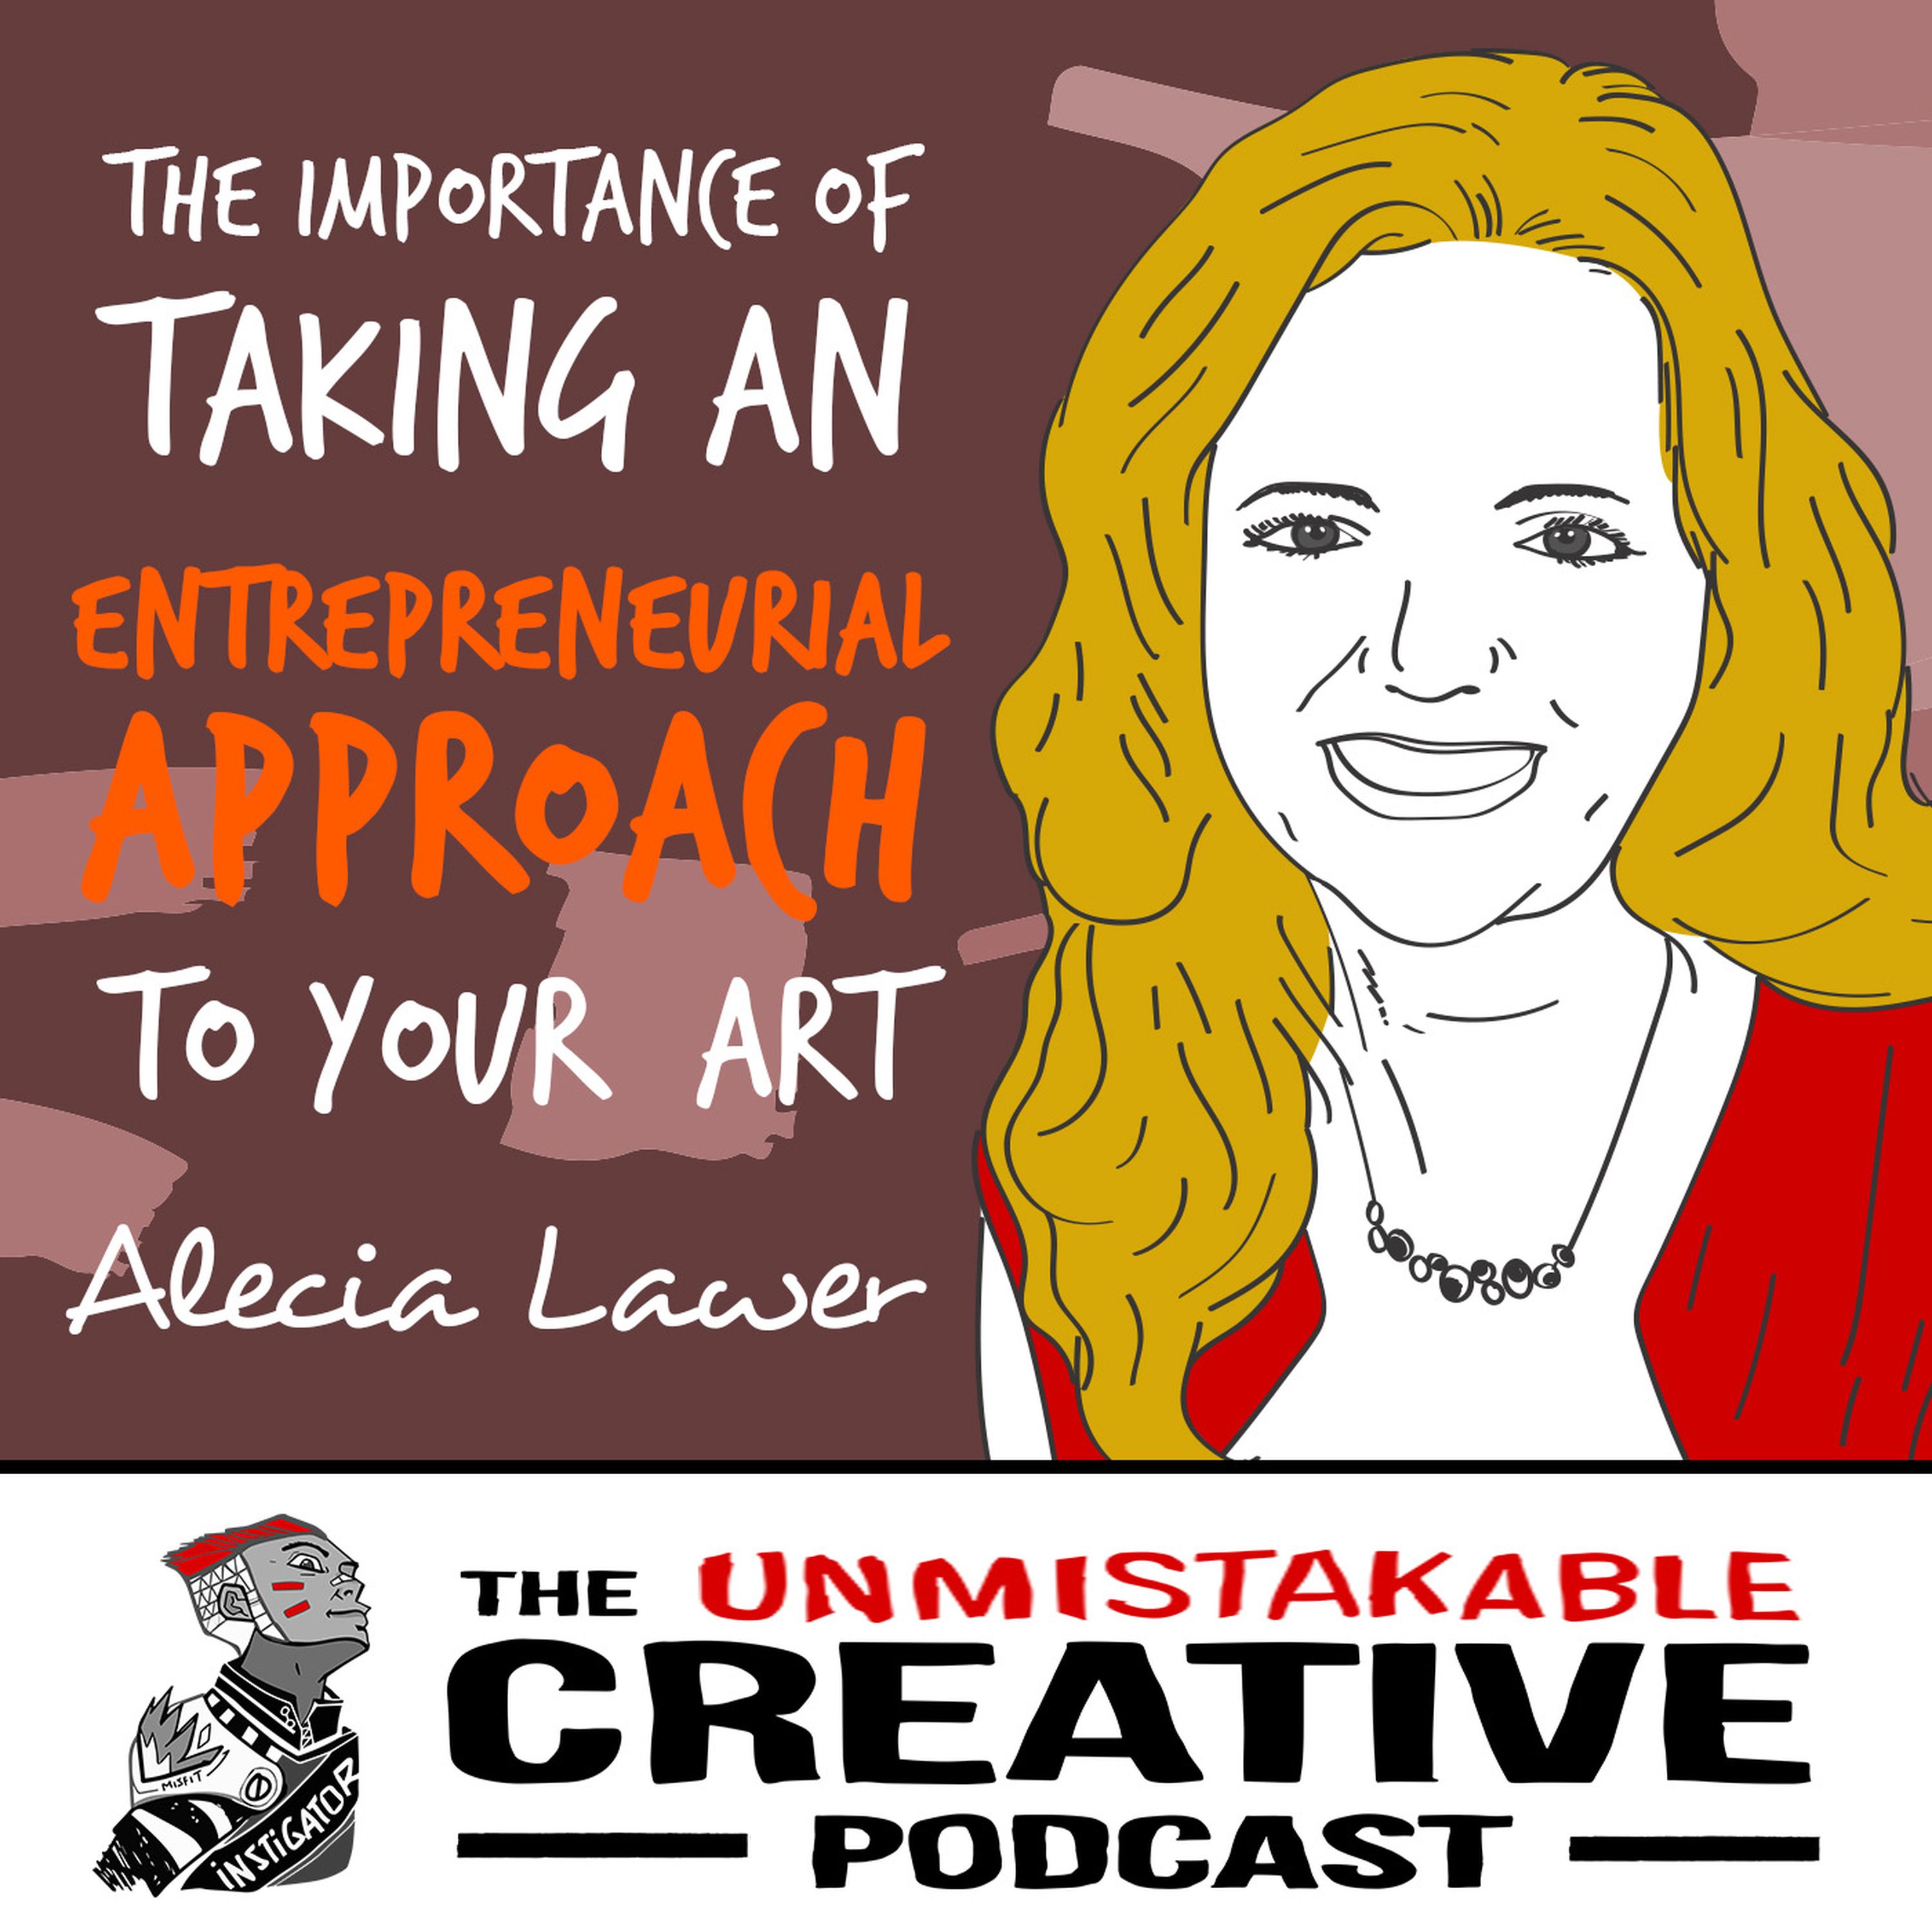 Alecia Lawyer: The Importance of Taking an Entrepreneurial Approach to Your Art